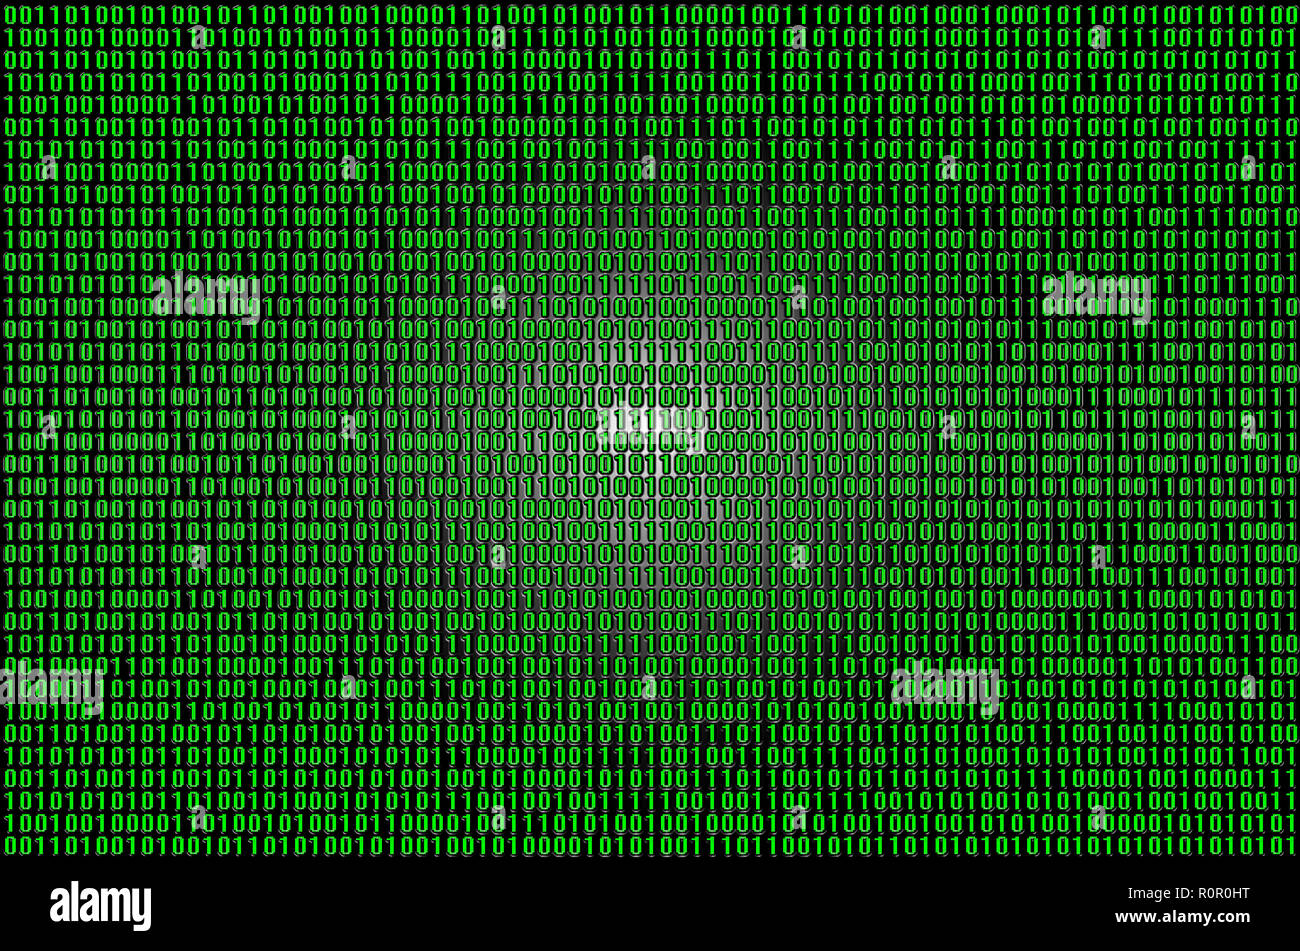 An image of a binary code made up of a set of green digits on a black ...